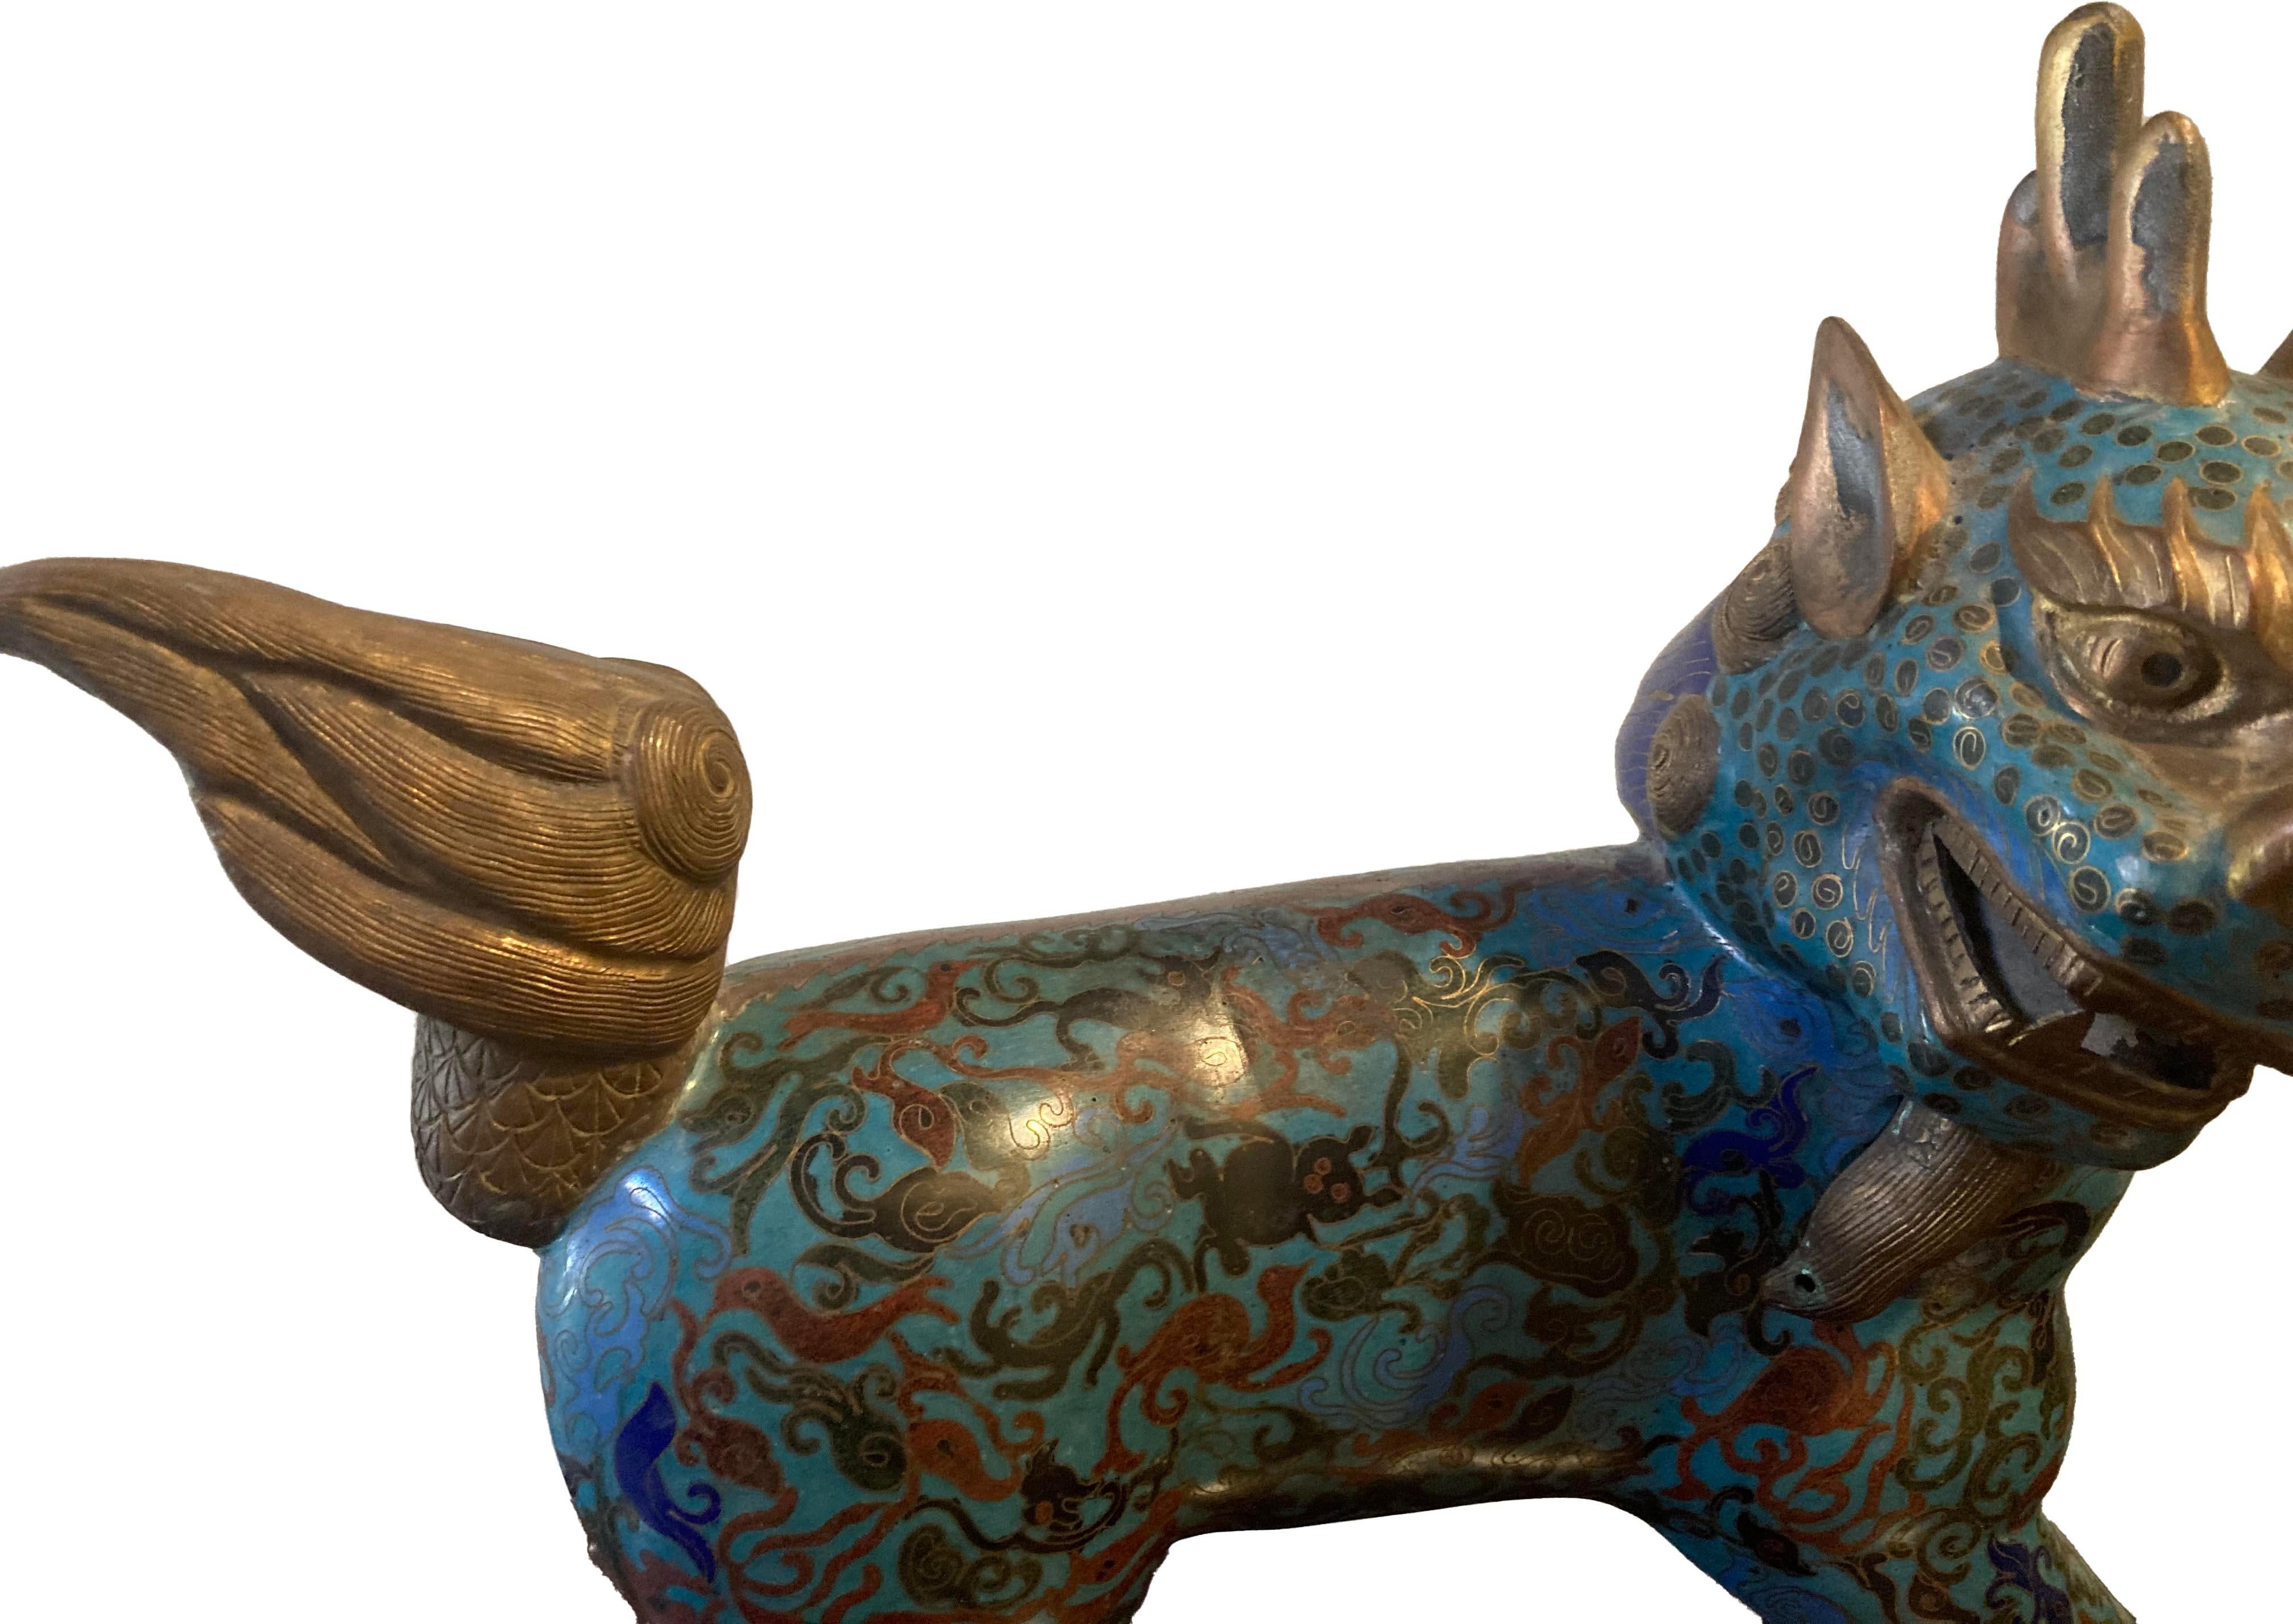 Bright blue and turquoise Cloisonne with terra cotta red detailing; in great condition. This is a very unique Fu dog representation that is highly stylized.